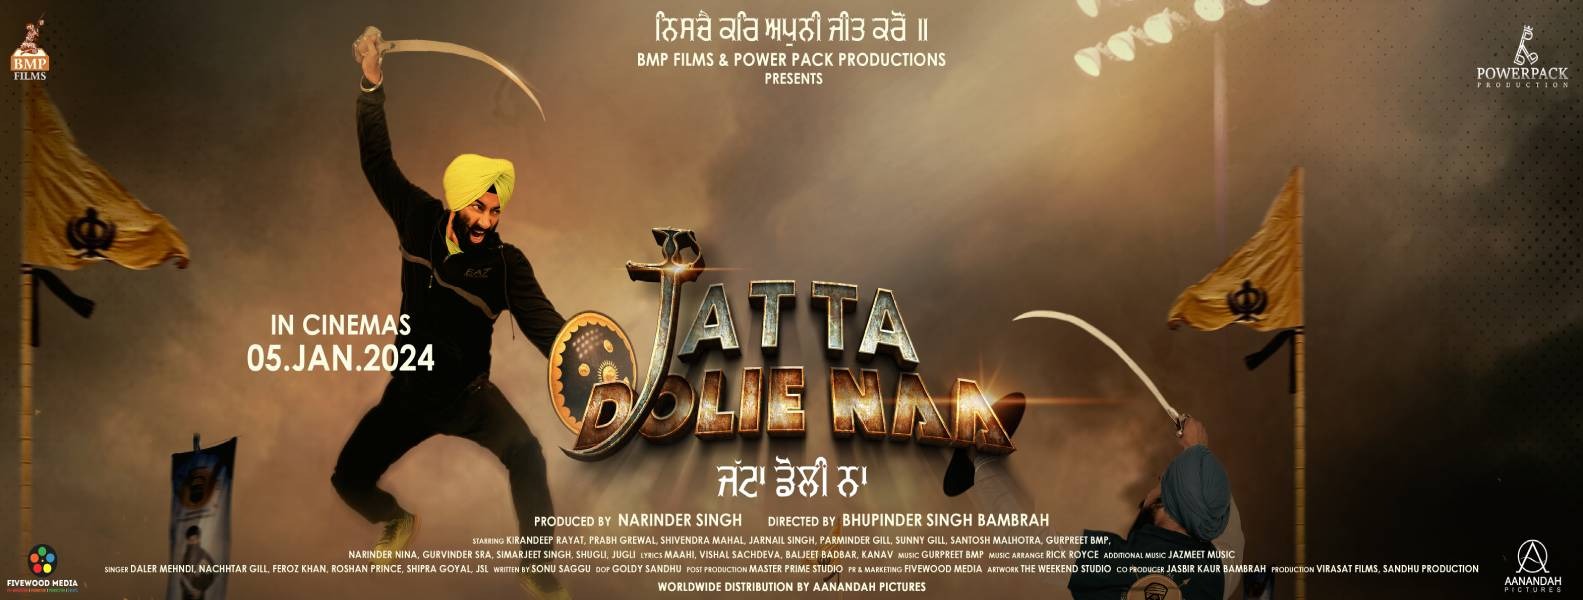 Have you Heard? Powerpack Productions Is Releasing Their Next Movie, Jatta Dolie Naa 